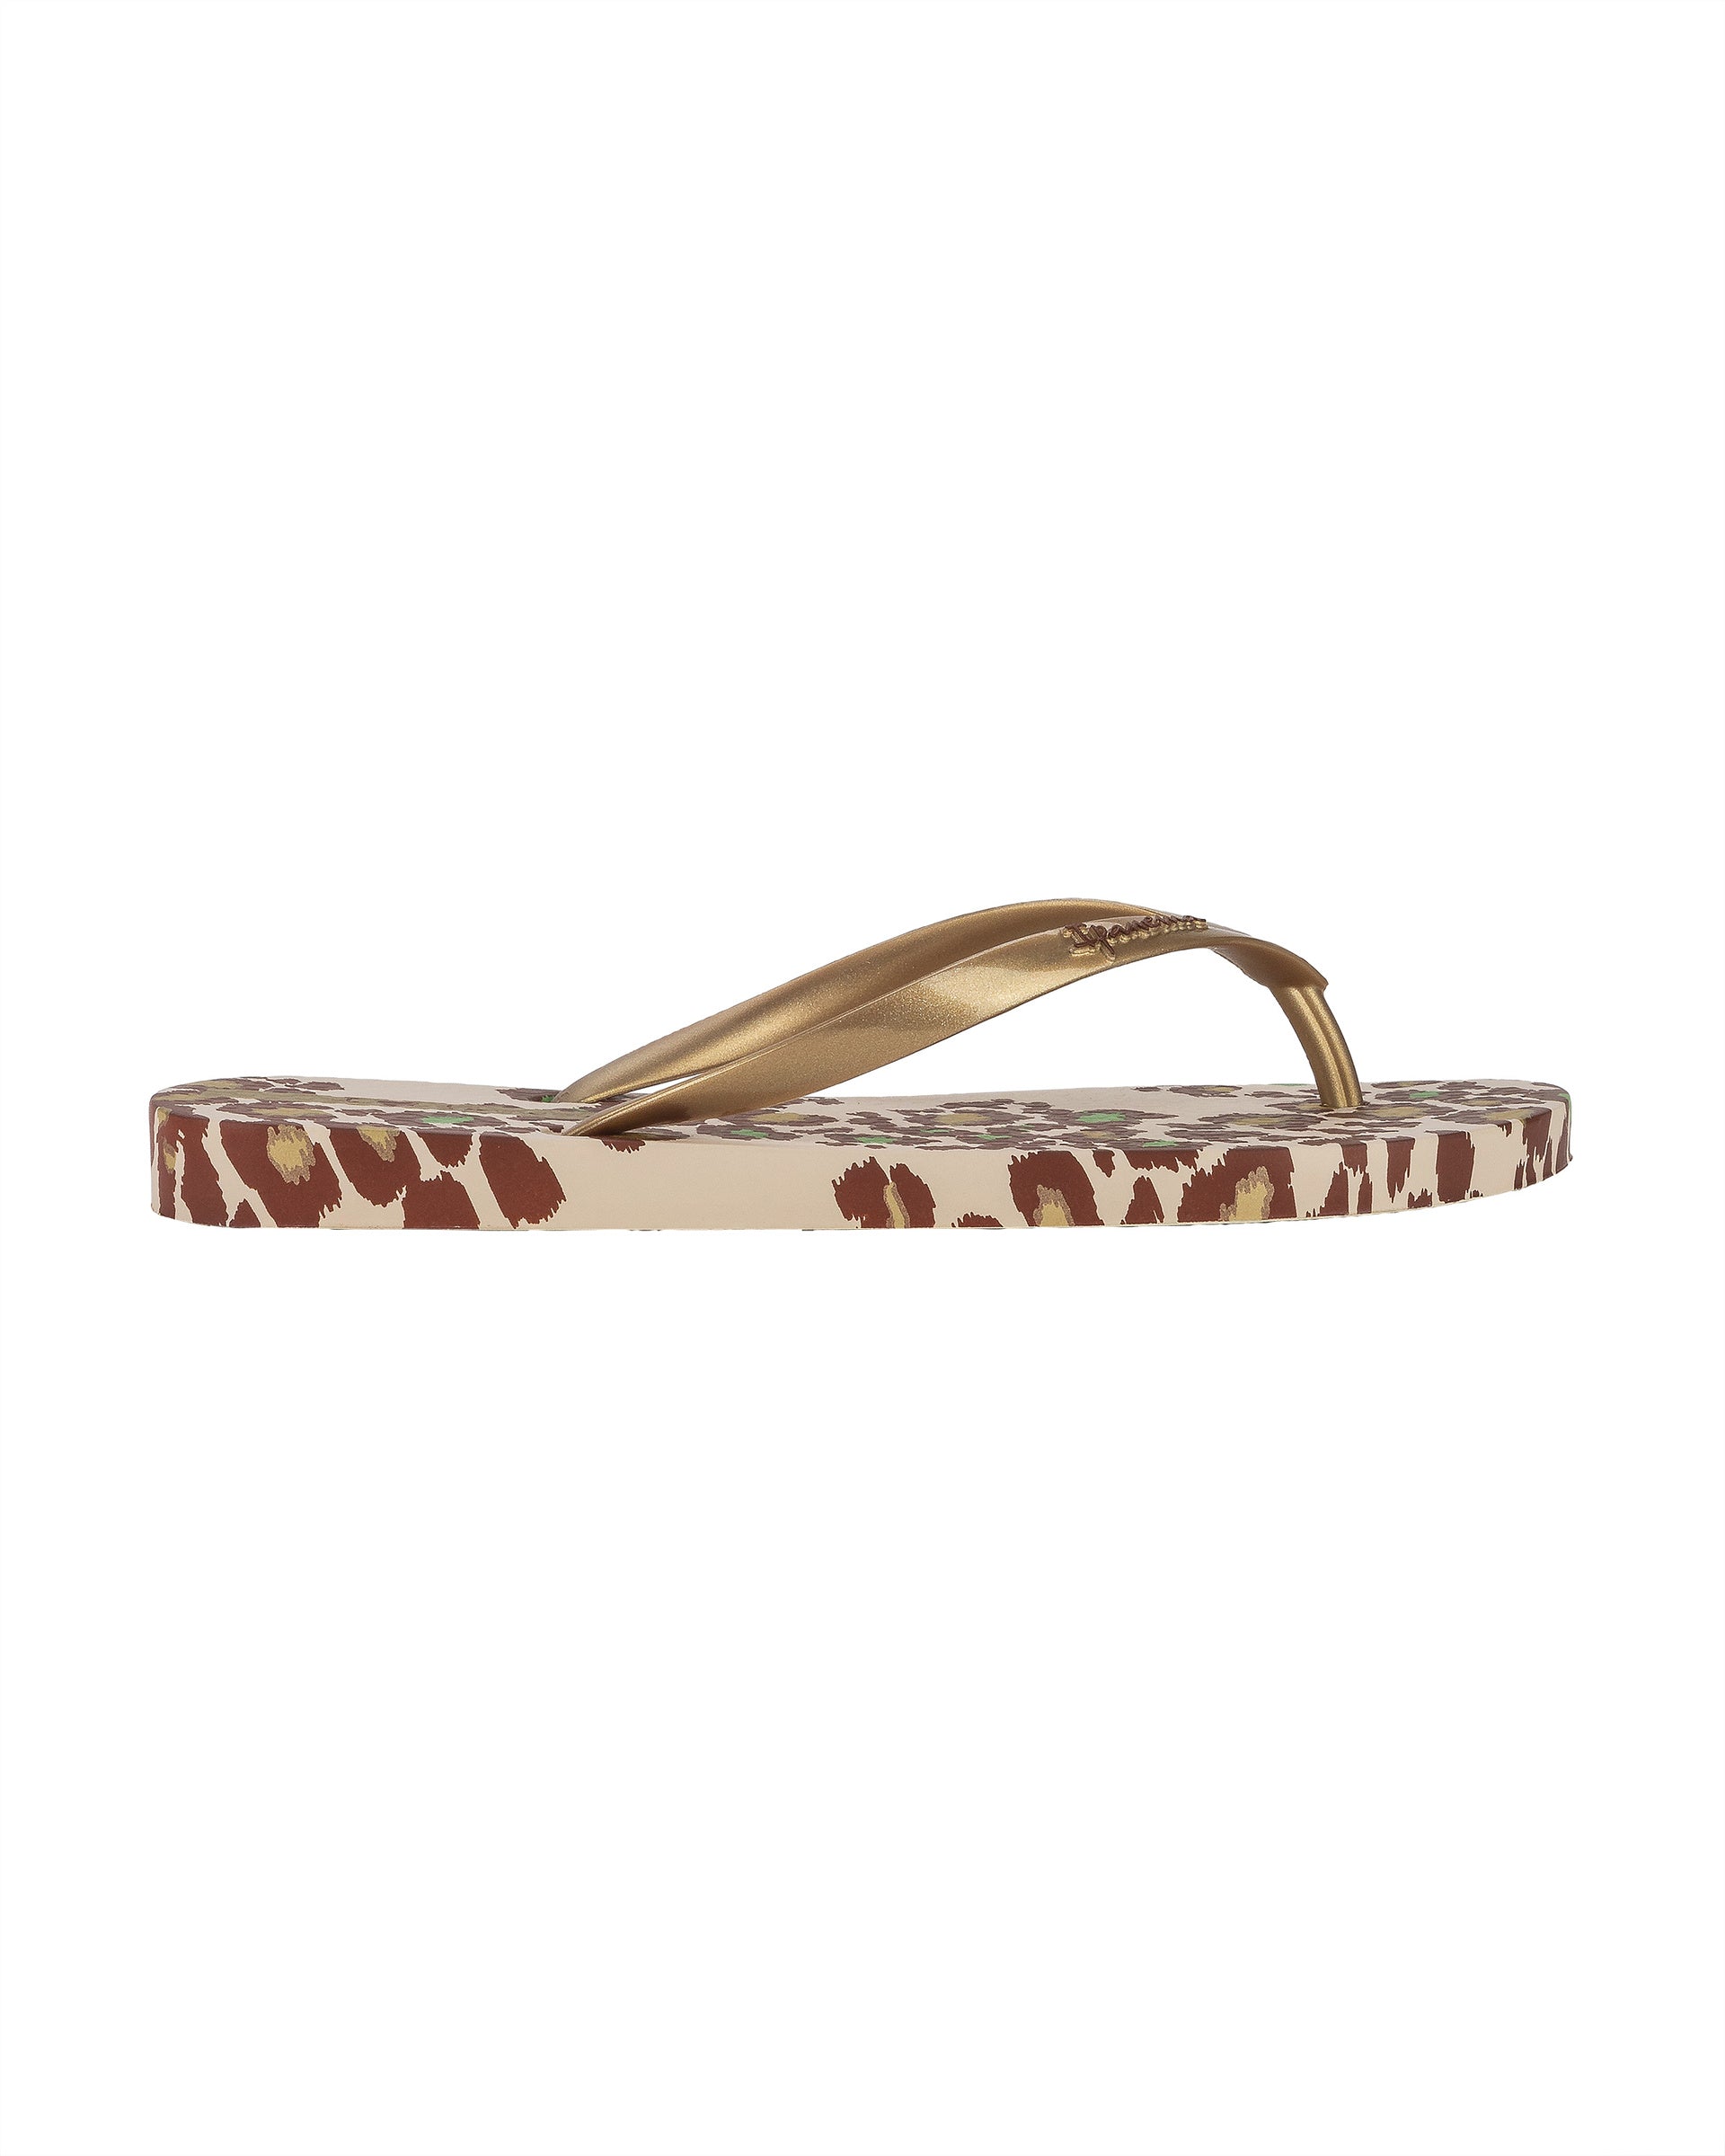 Outer side view of a beige Ipanema Animal Print women's flip flop with glitter gold straps and leopard sole print.